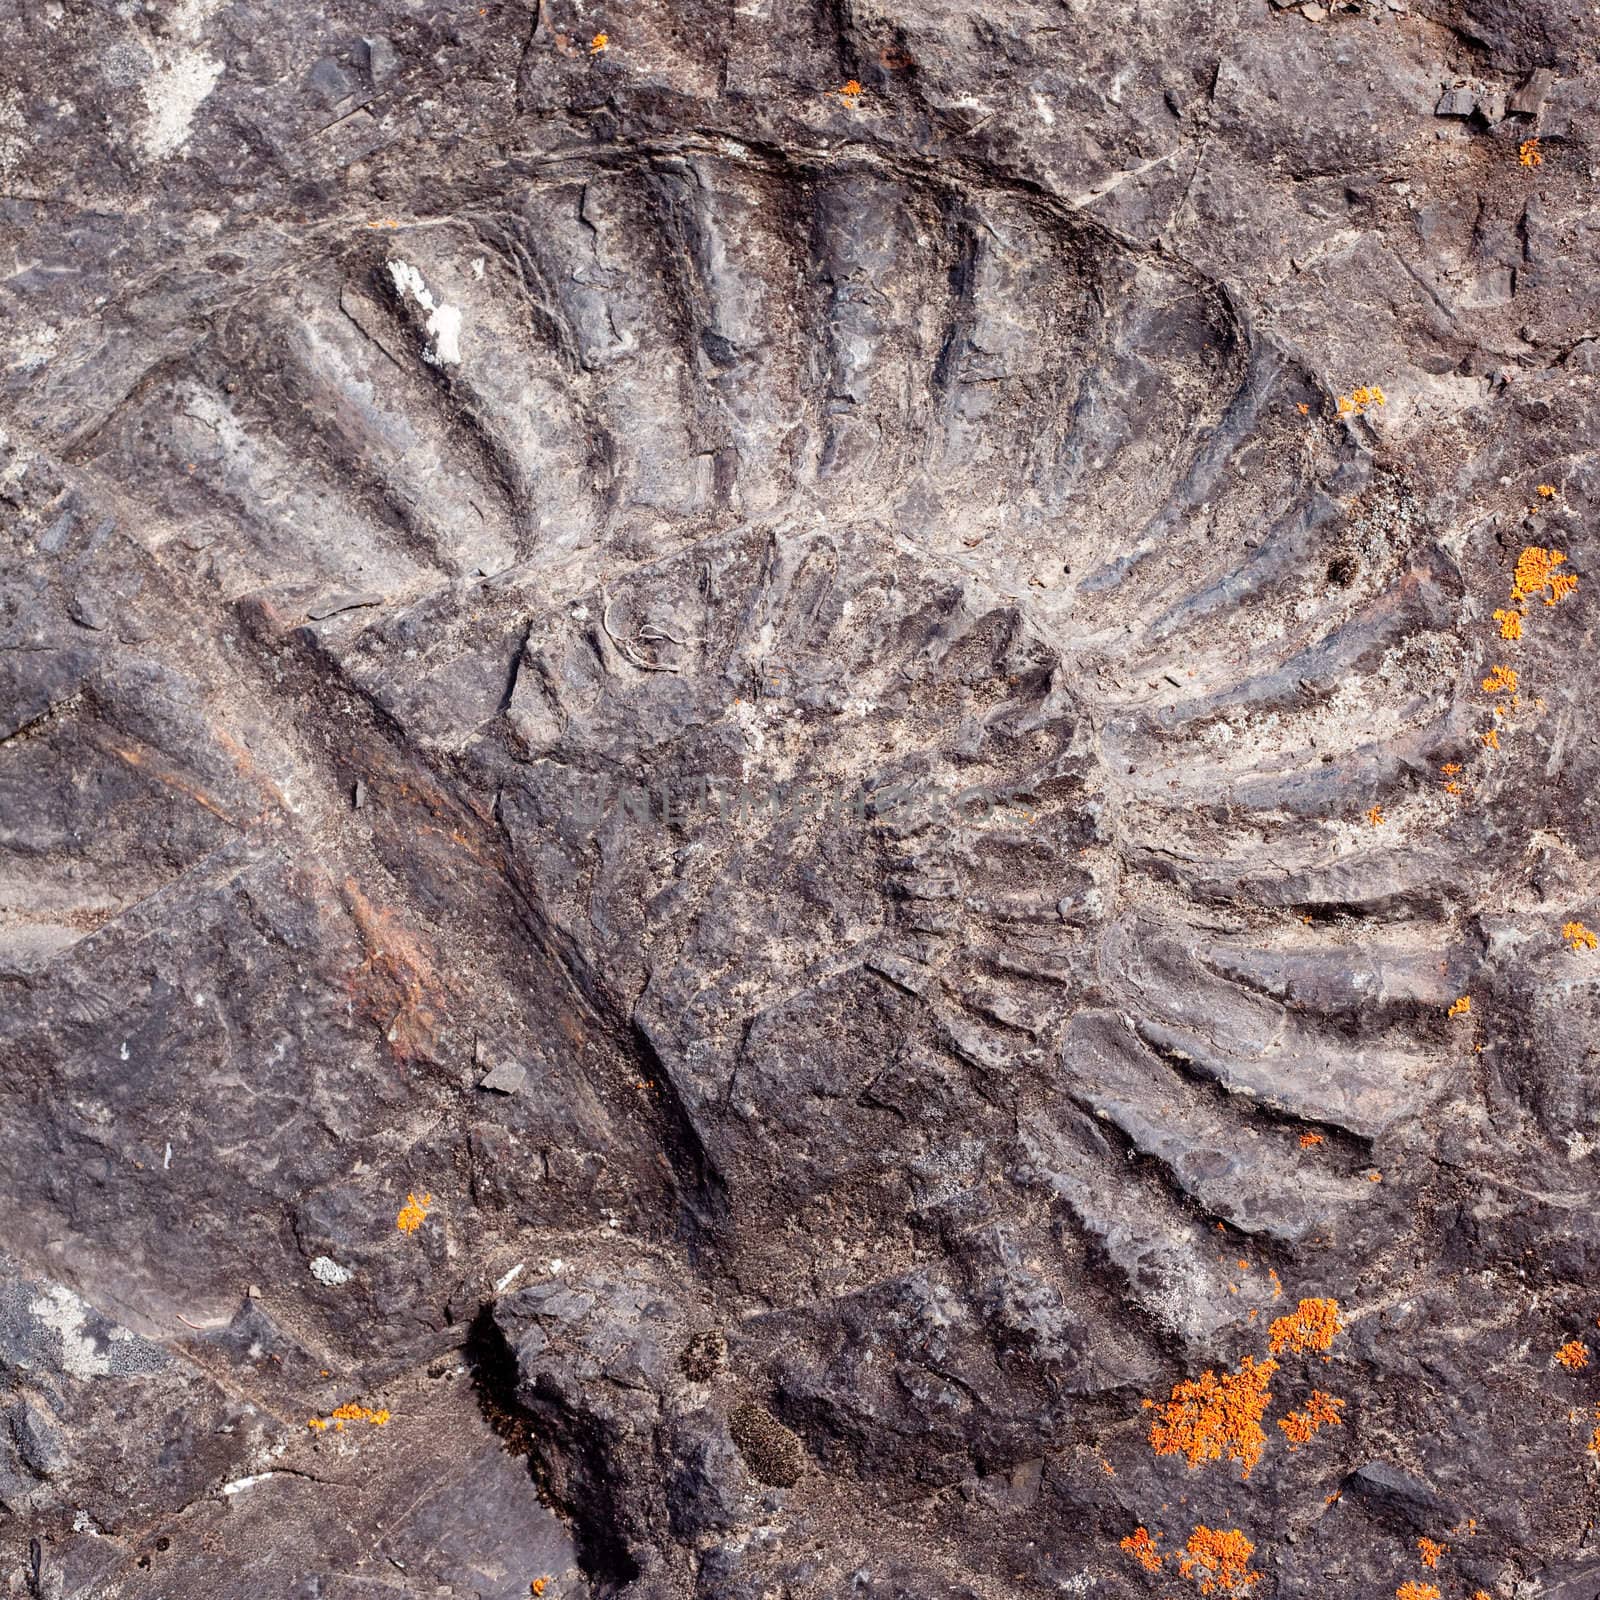 Big fossilized ammonite by PiLens